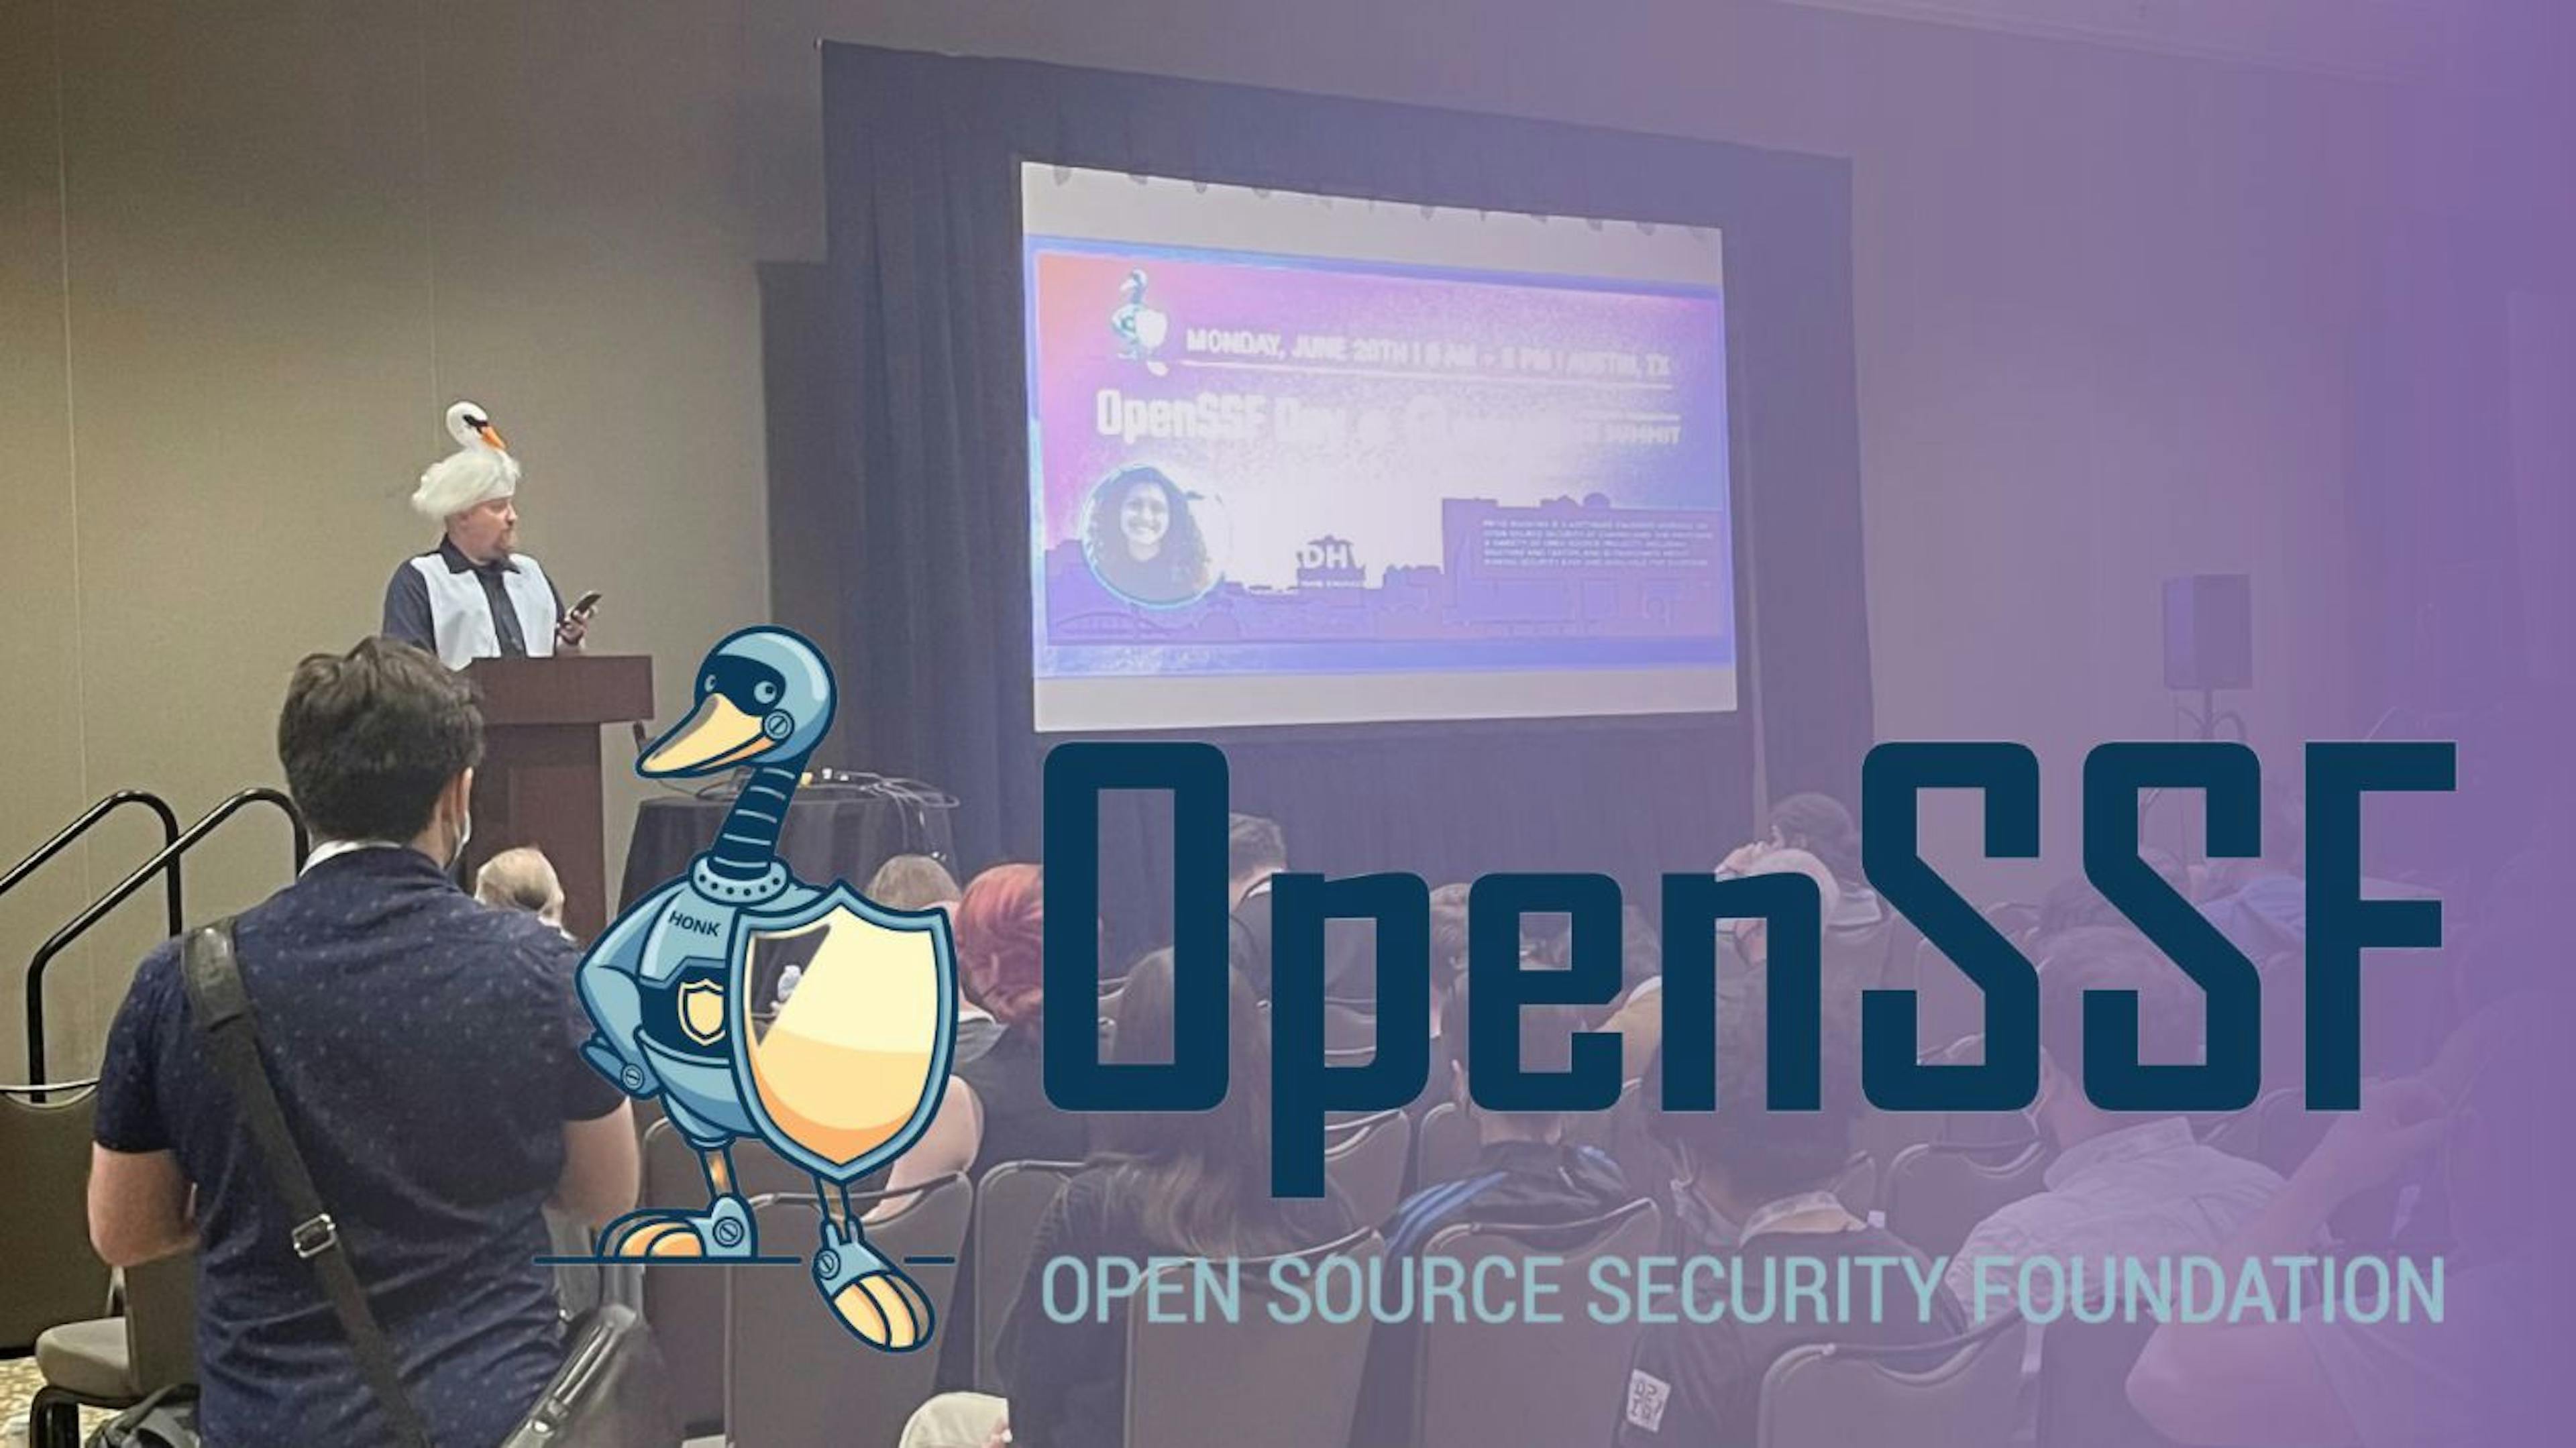 /quick-guide-to-the-open-source-security-summit feature image